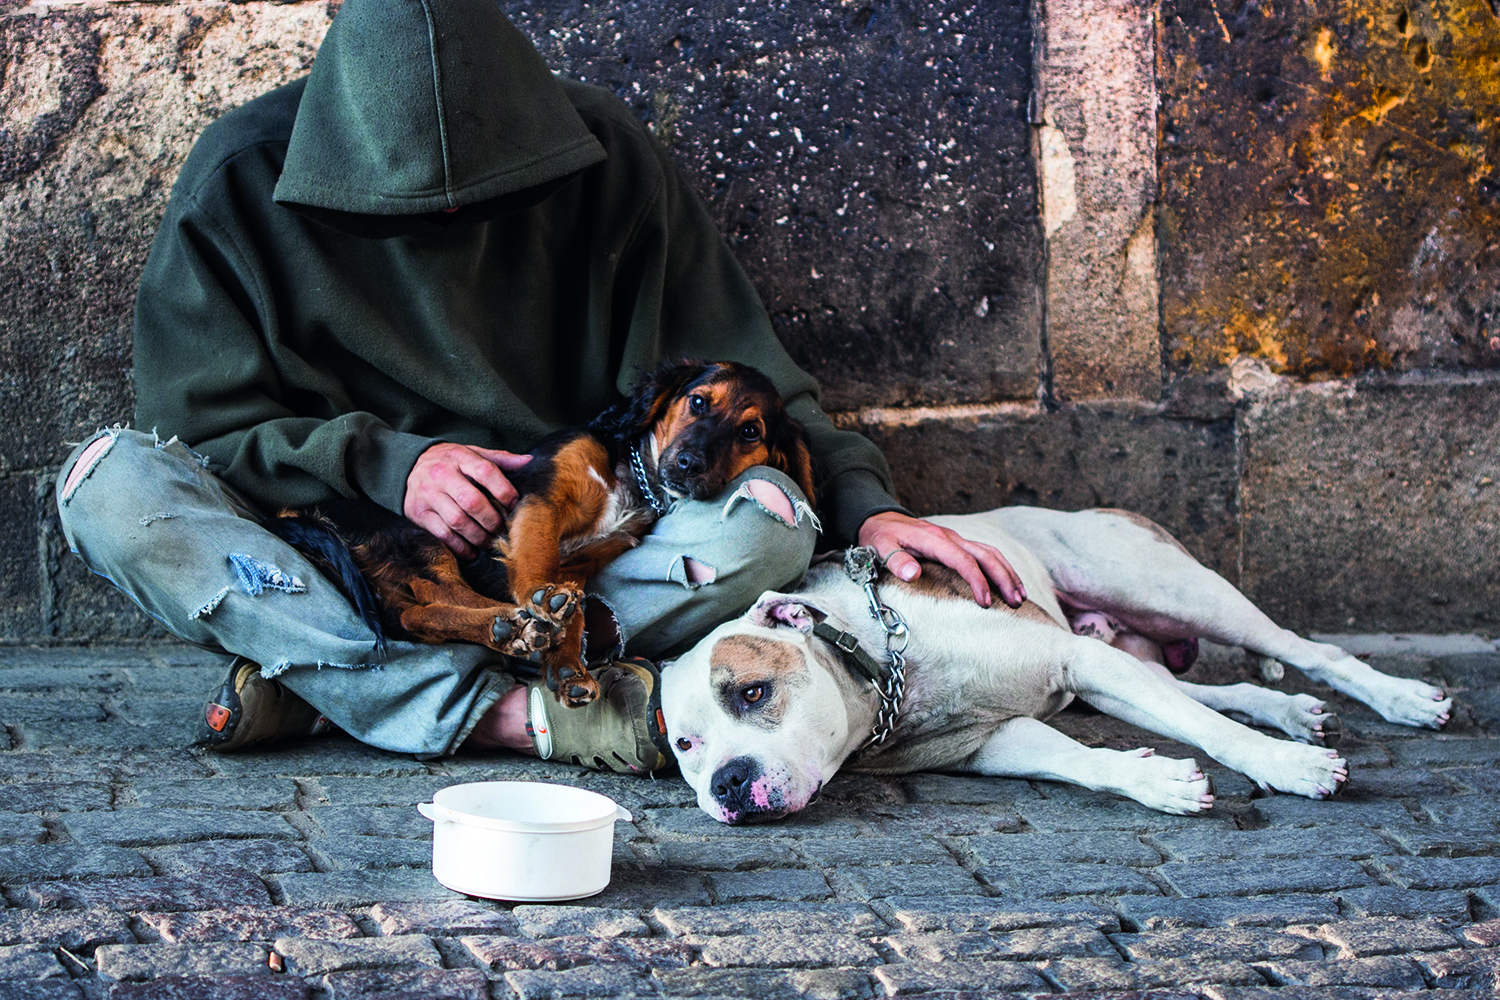 A homeless man on the street with two dogs